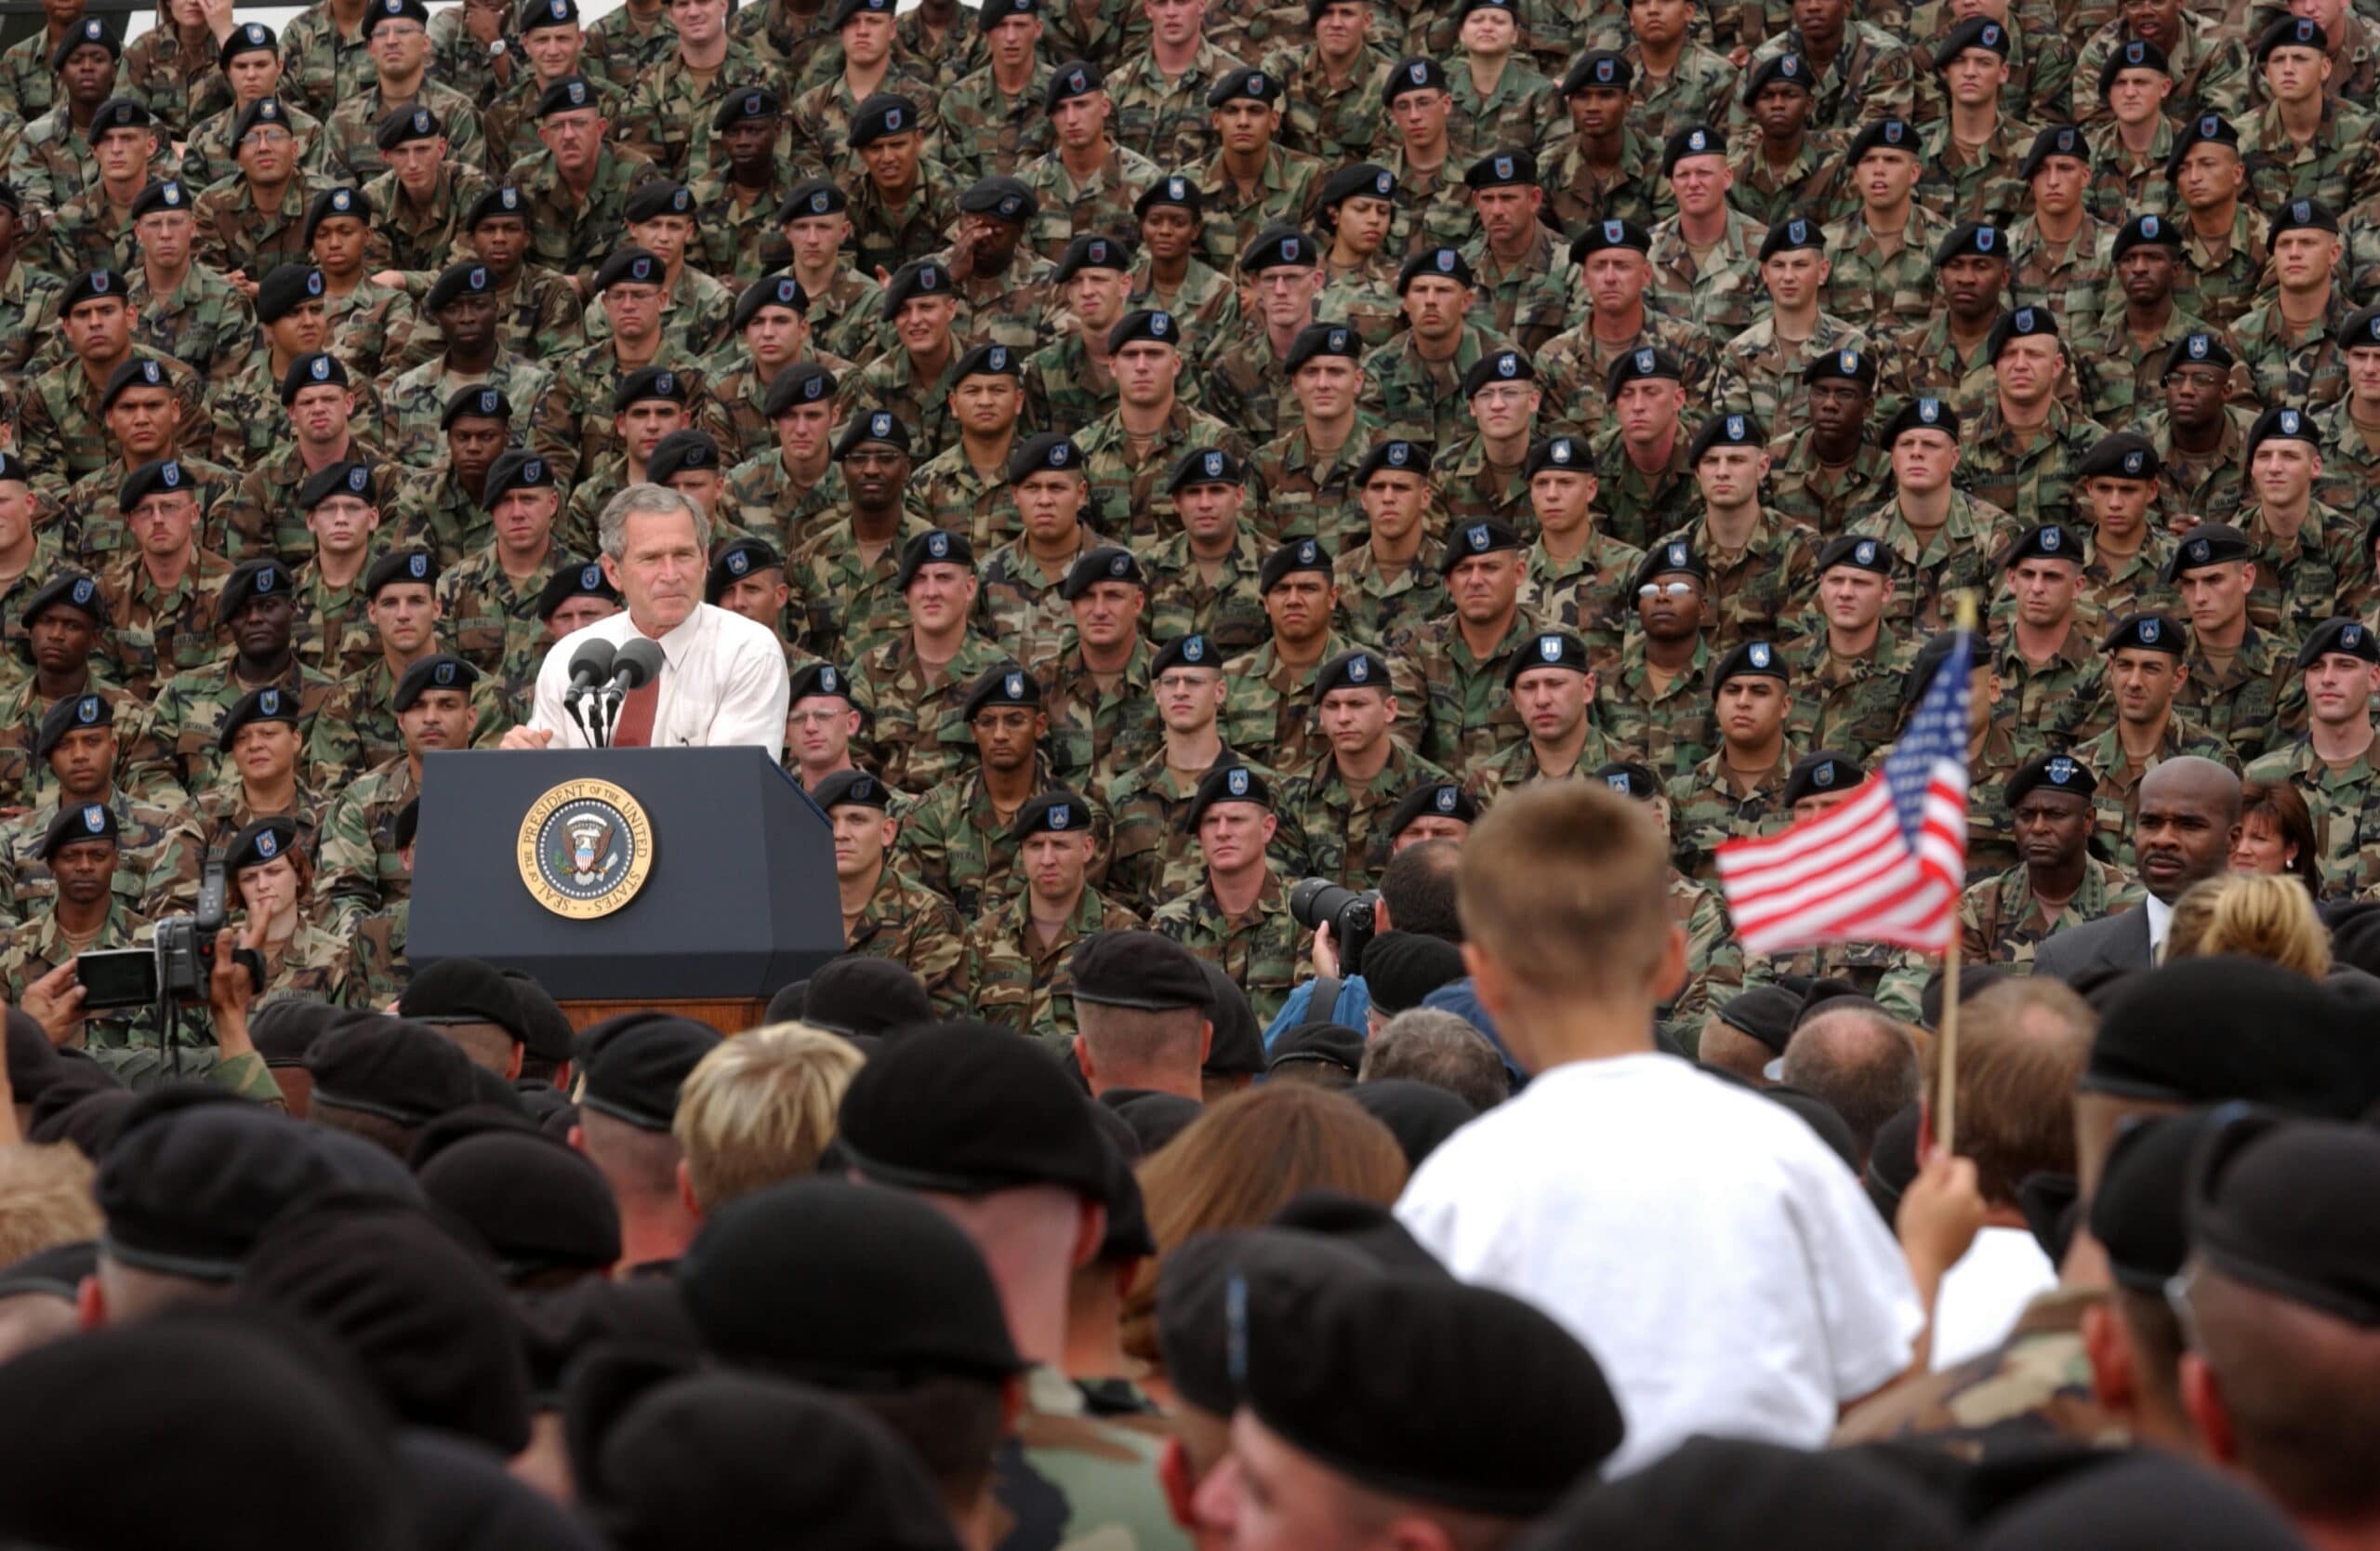 President George W. Bush addresses troops and families of the 10th Mountain Division and other members of the Fort Drum Community at Fort Drum, N.Y., July 19, 2002. Series: Photographs Related to the George W. Bush Administration, 1/20/2001 - 1/20/2009 Collection: Records of the White House Photo Office (George W. Bush Administration), 1/20/2001 - 1/20/2009. Public Domain.